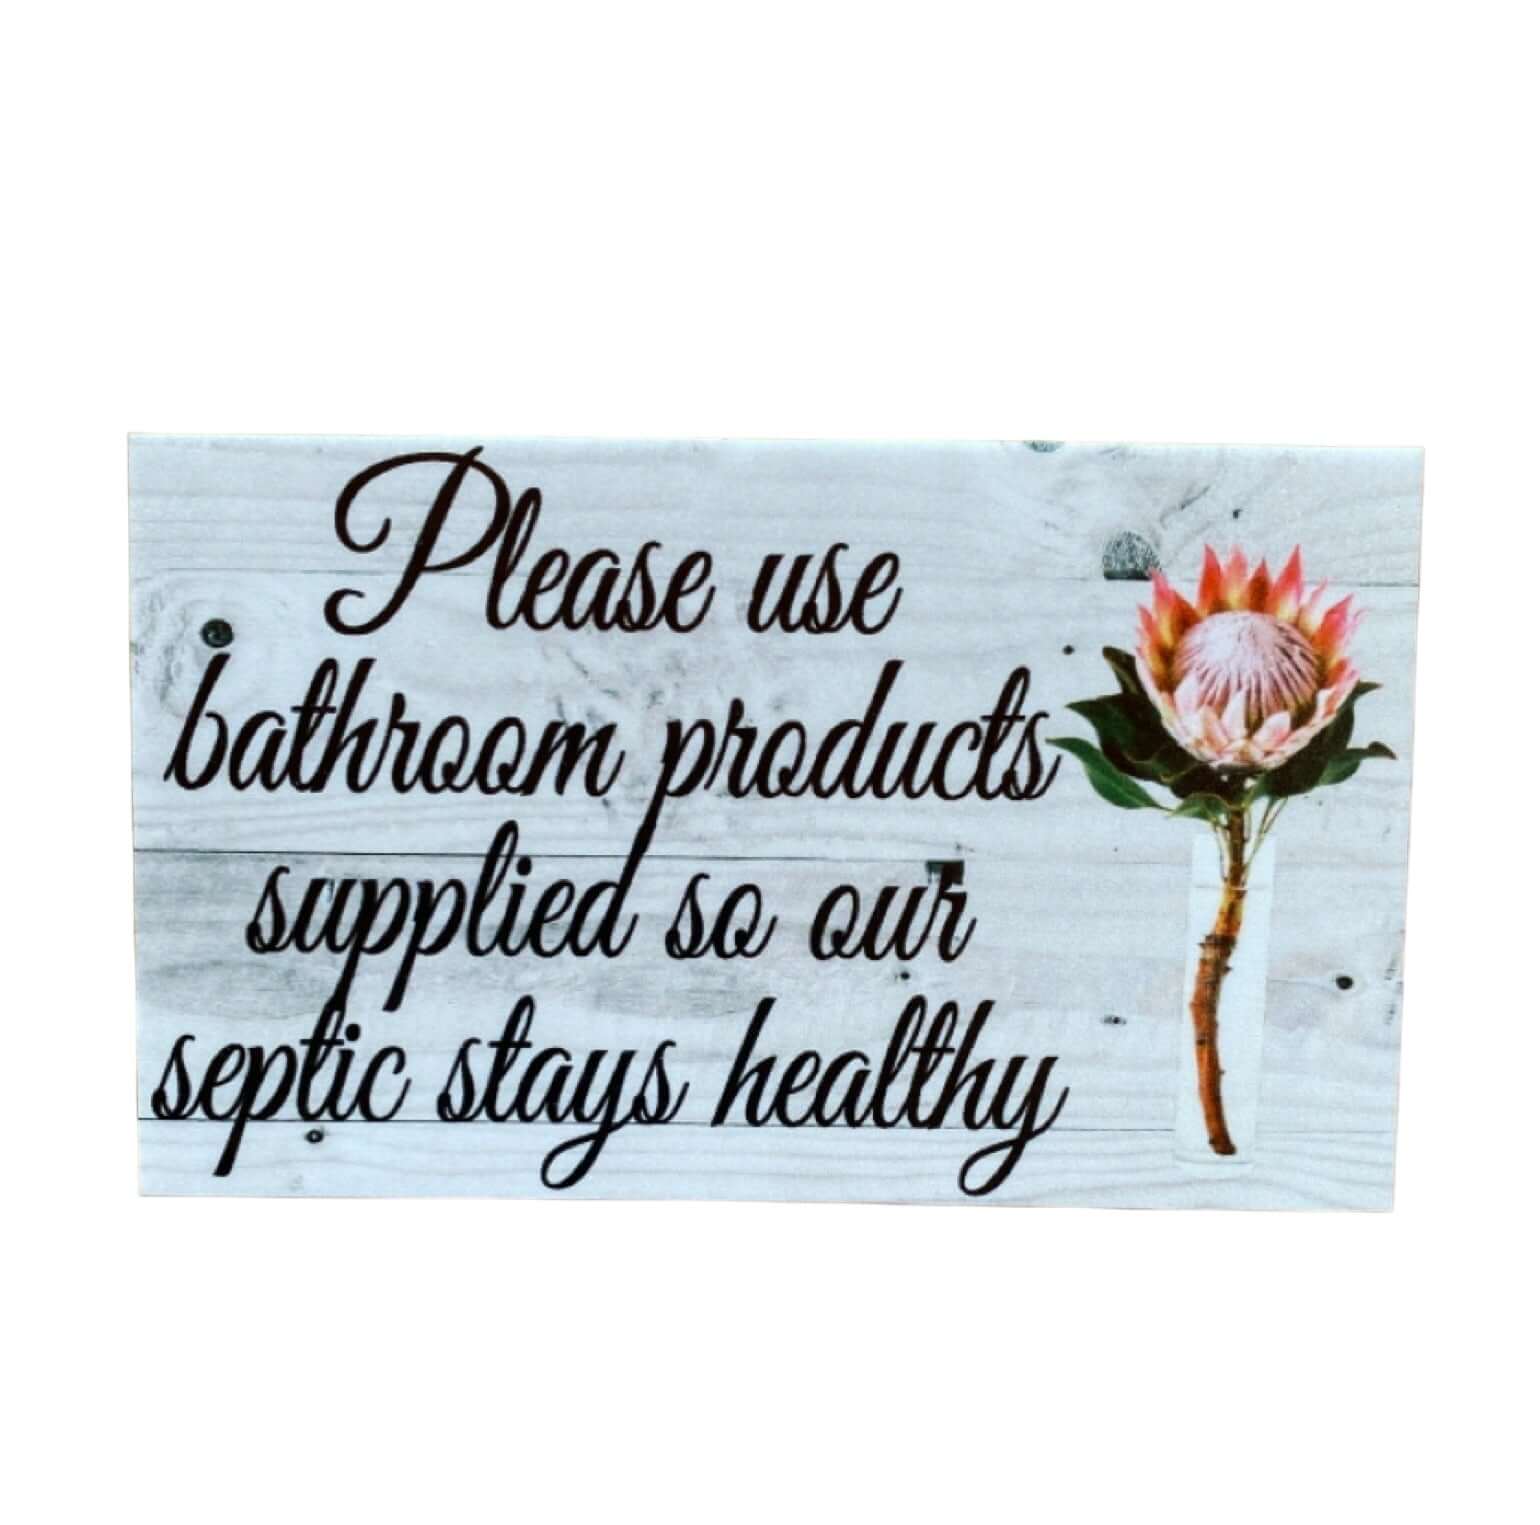 Bathroom Eco Friendly Guests Protea Sign - The Renmy Store Homewares & Gifts 